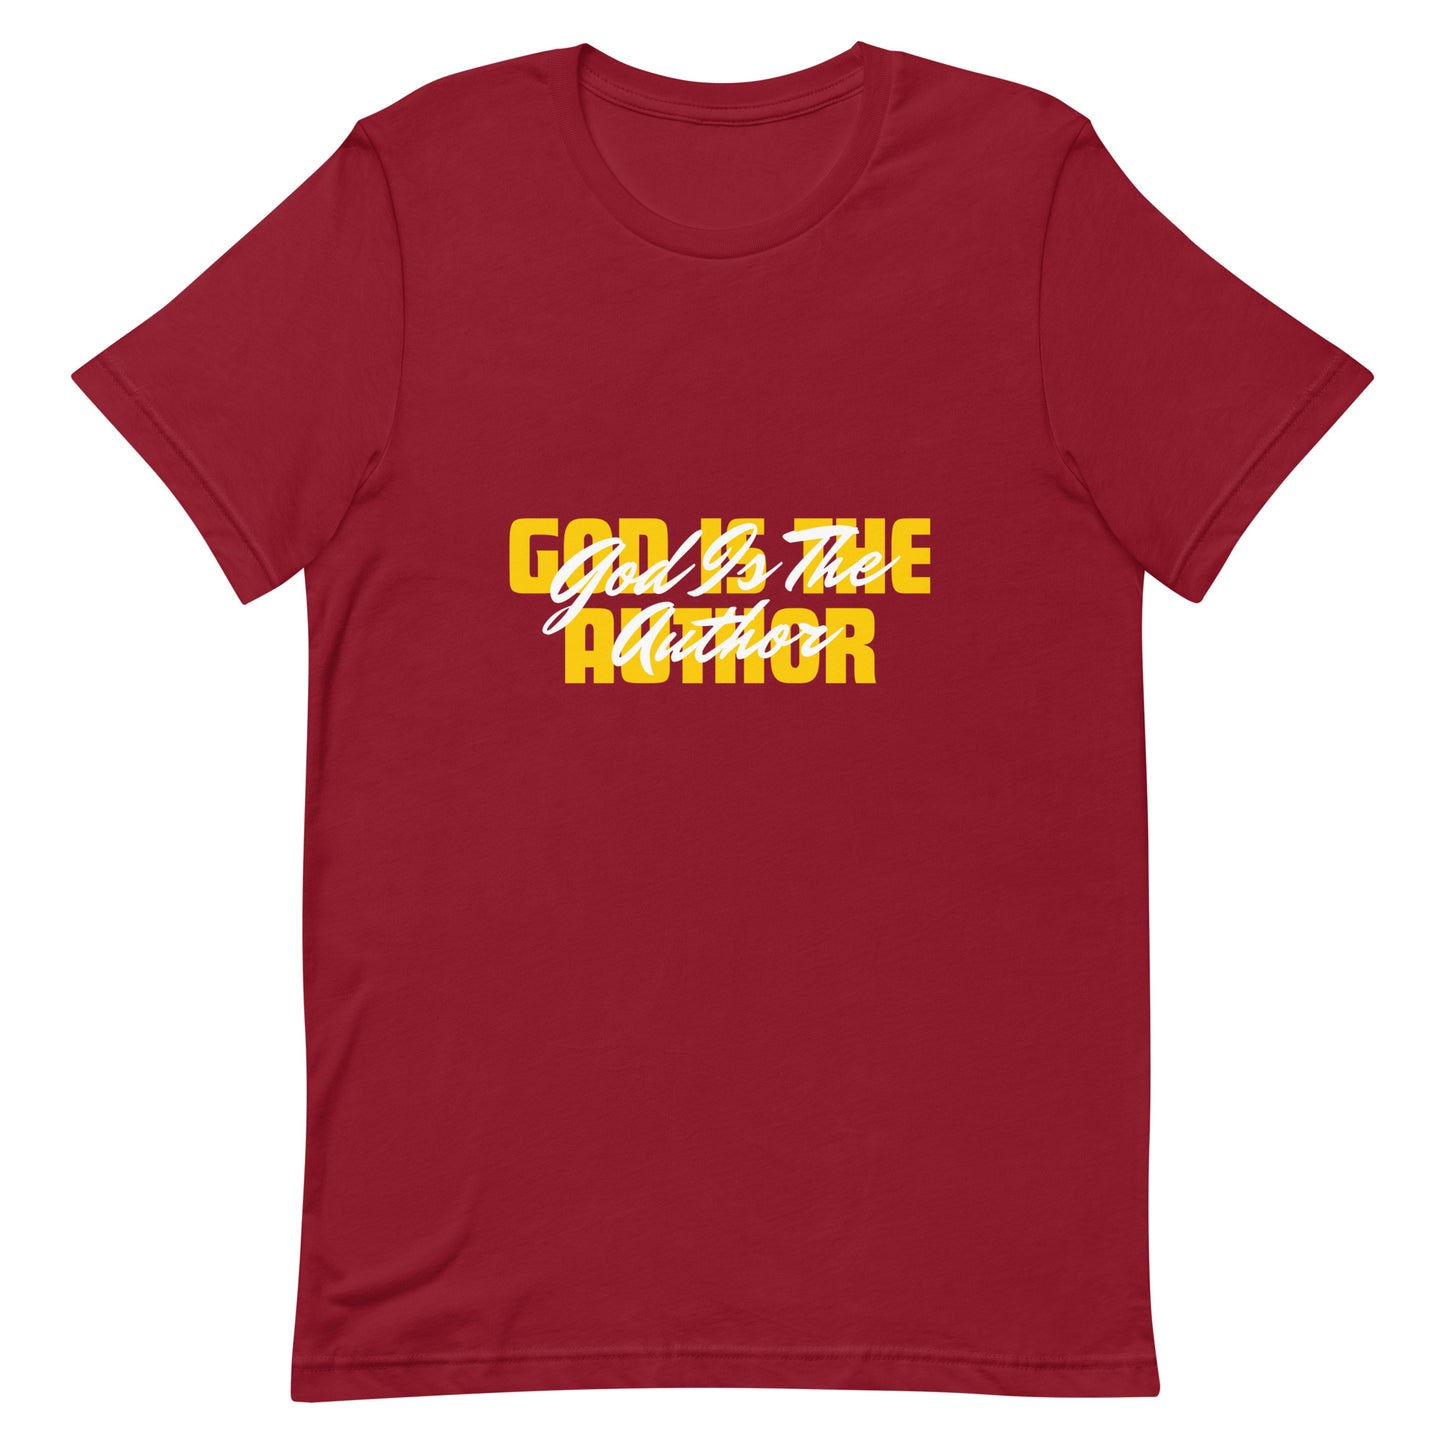 God Is The Author - Women and Teen's Classic T-Shirt